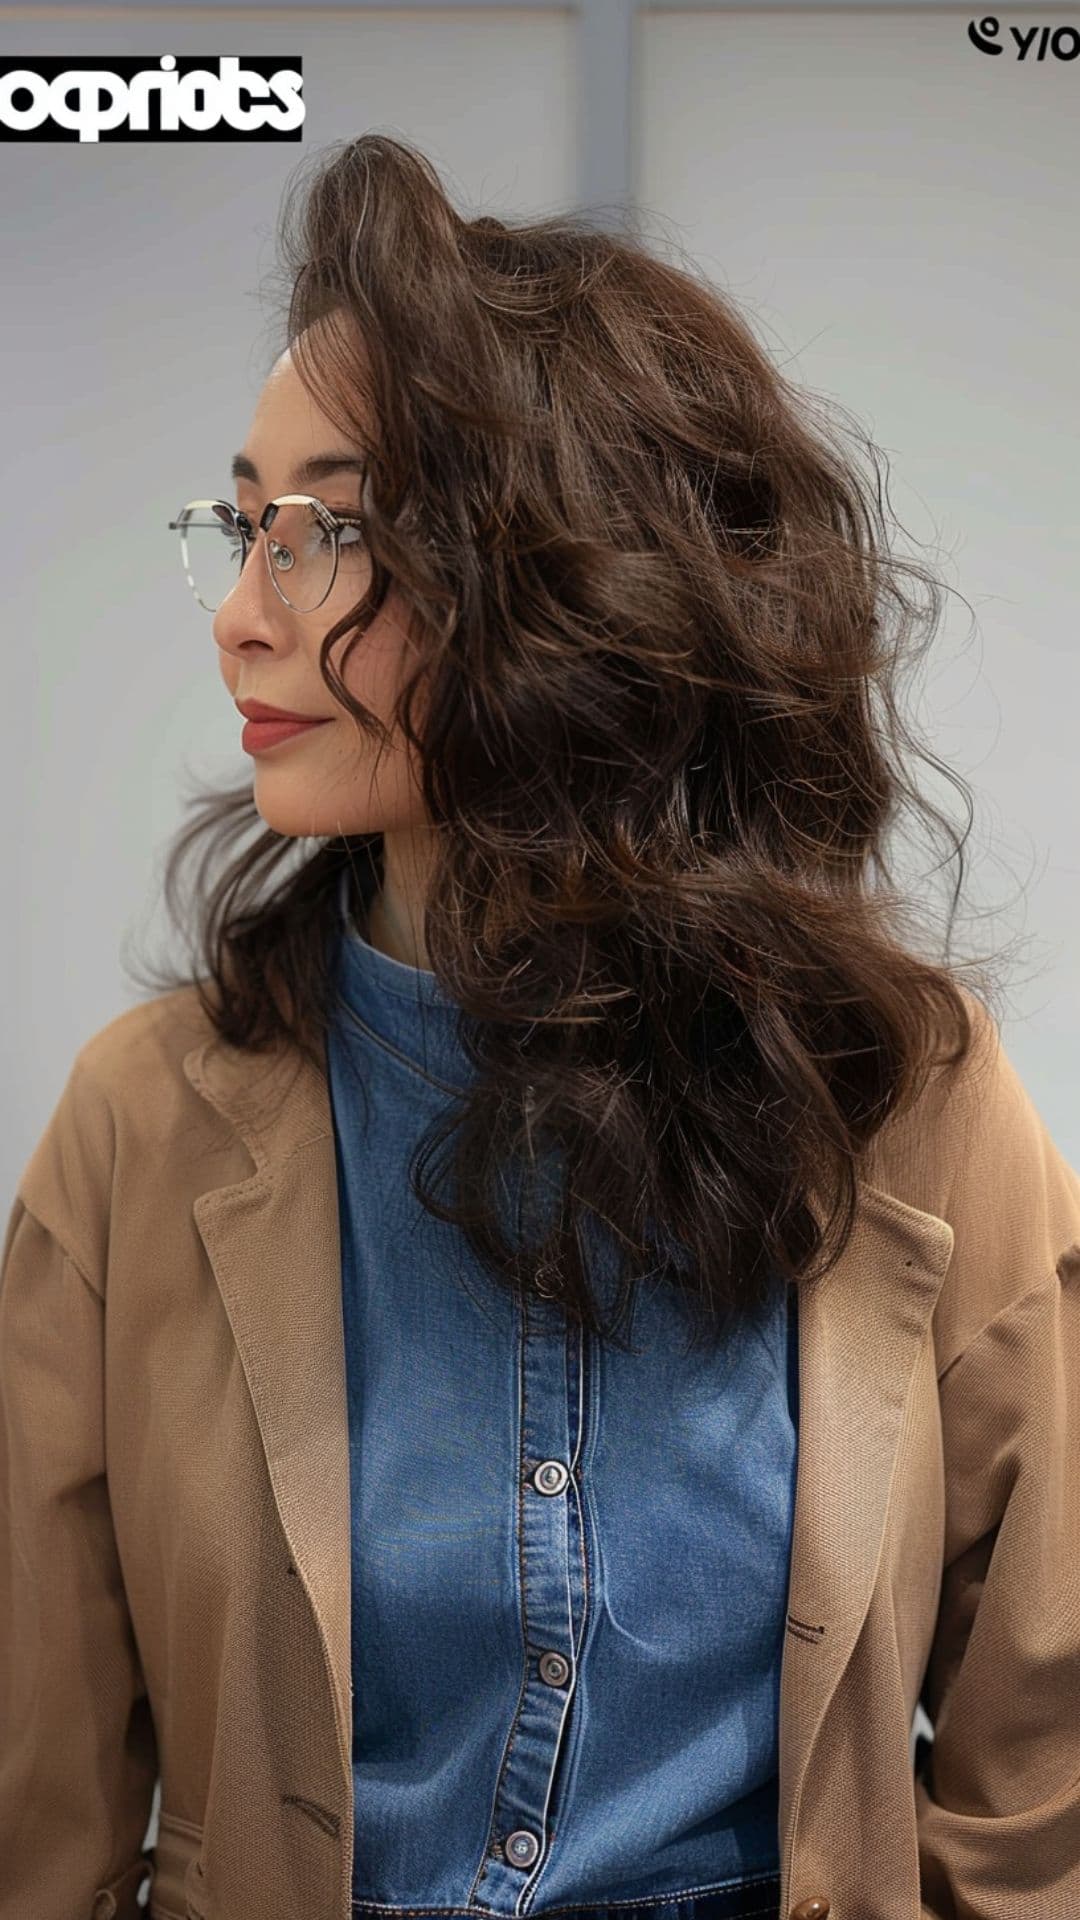 An old woman modelling a layered cut with subtle curls.